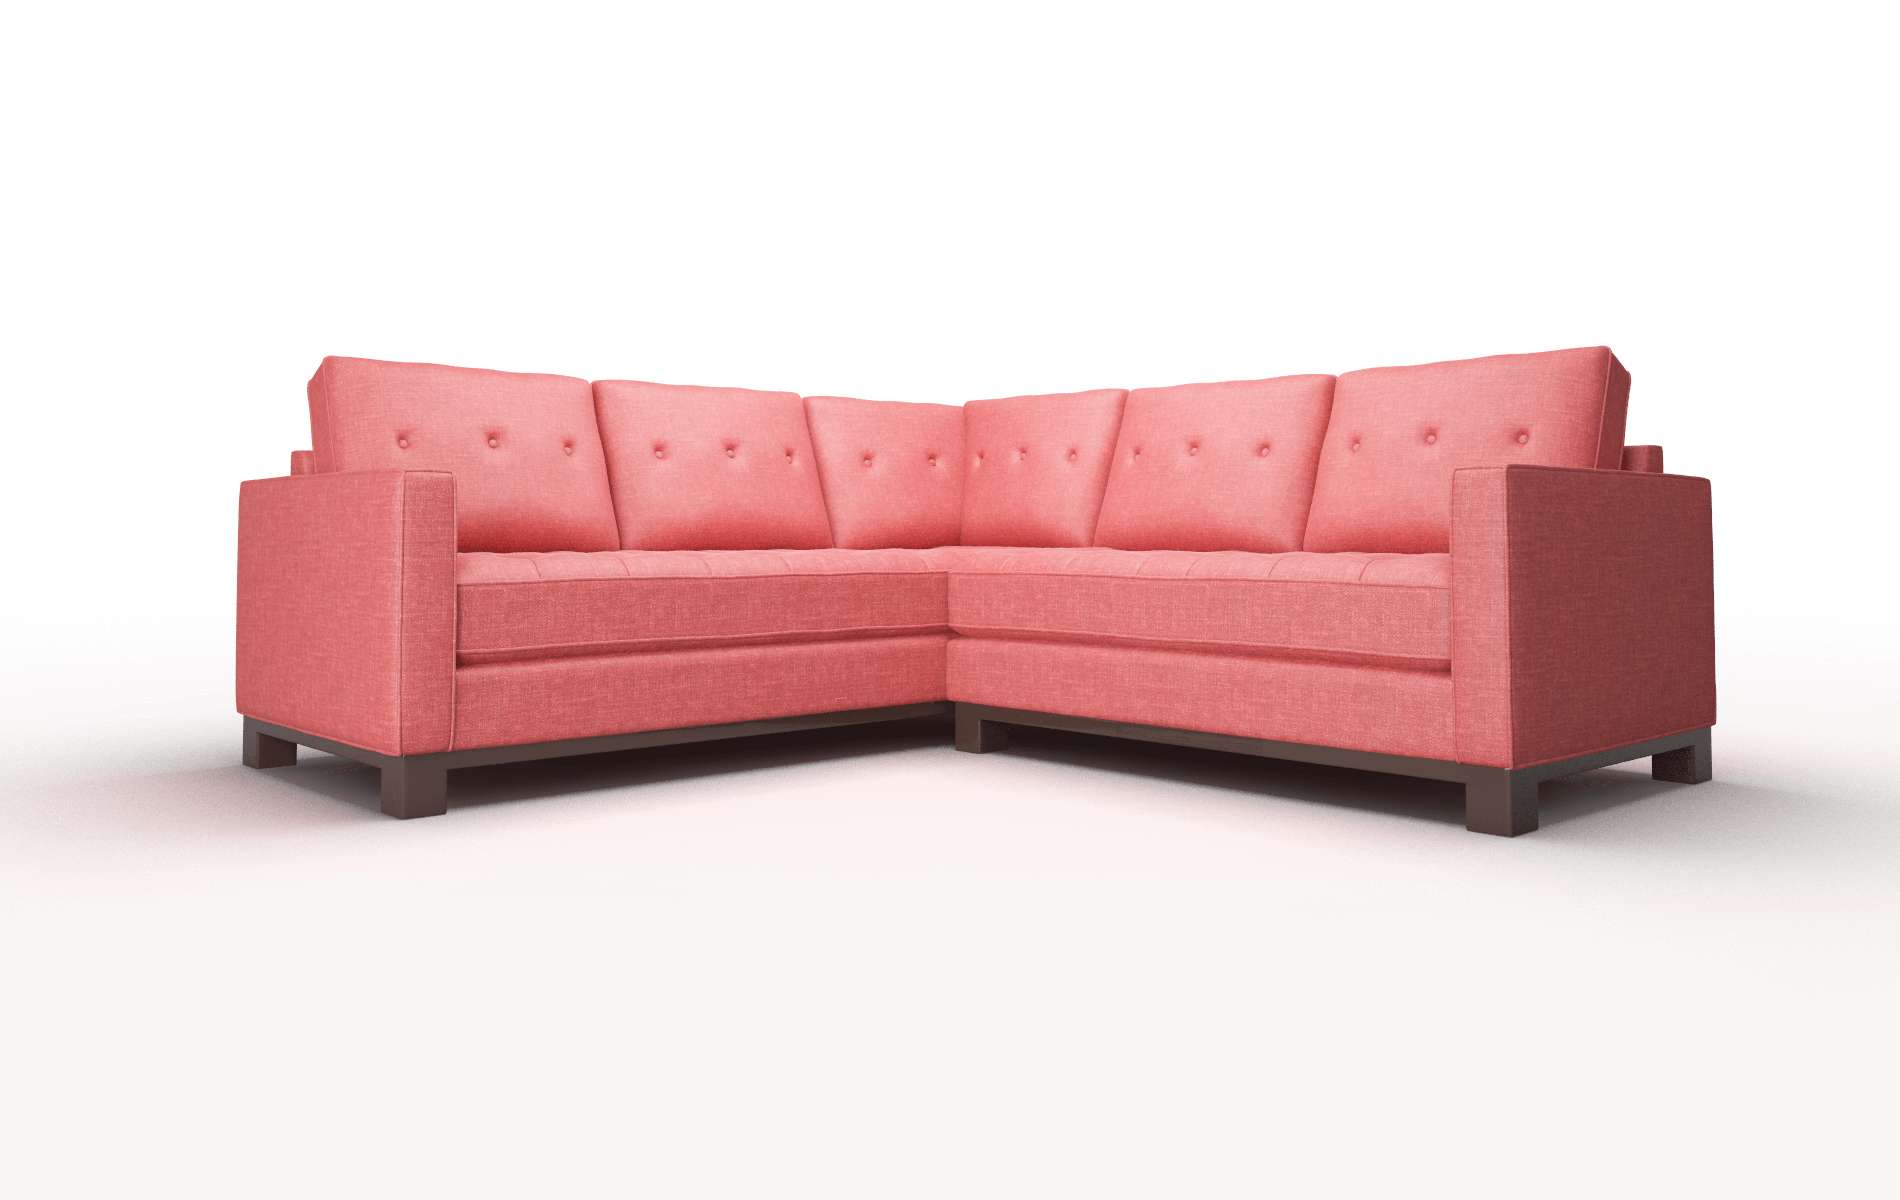 Syros Royale Berry Sectional espresso legs